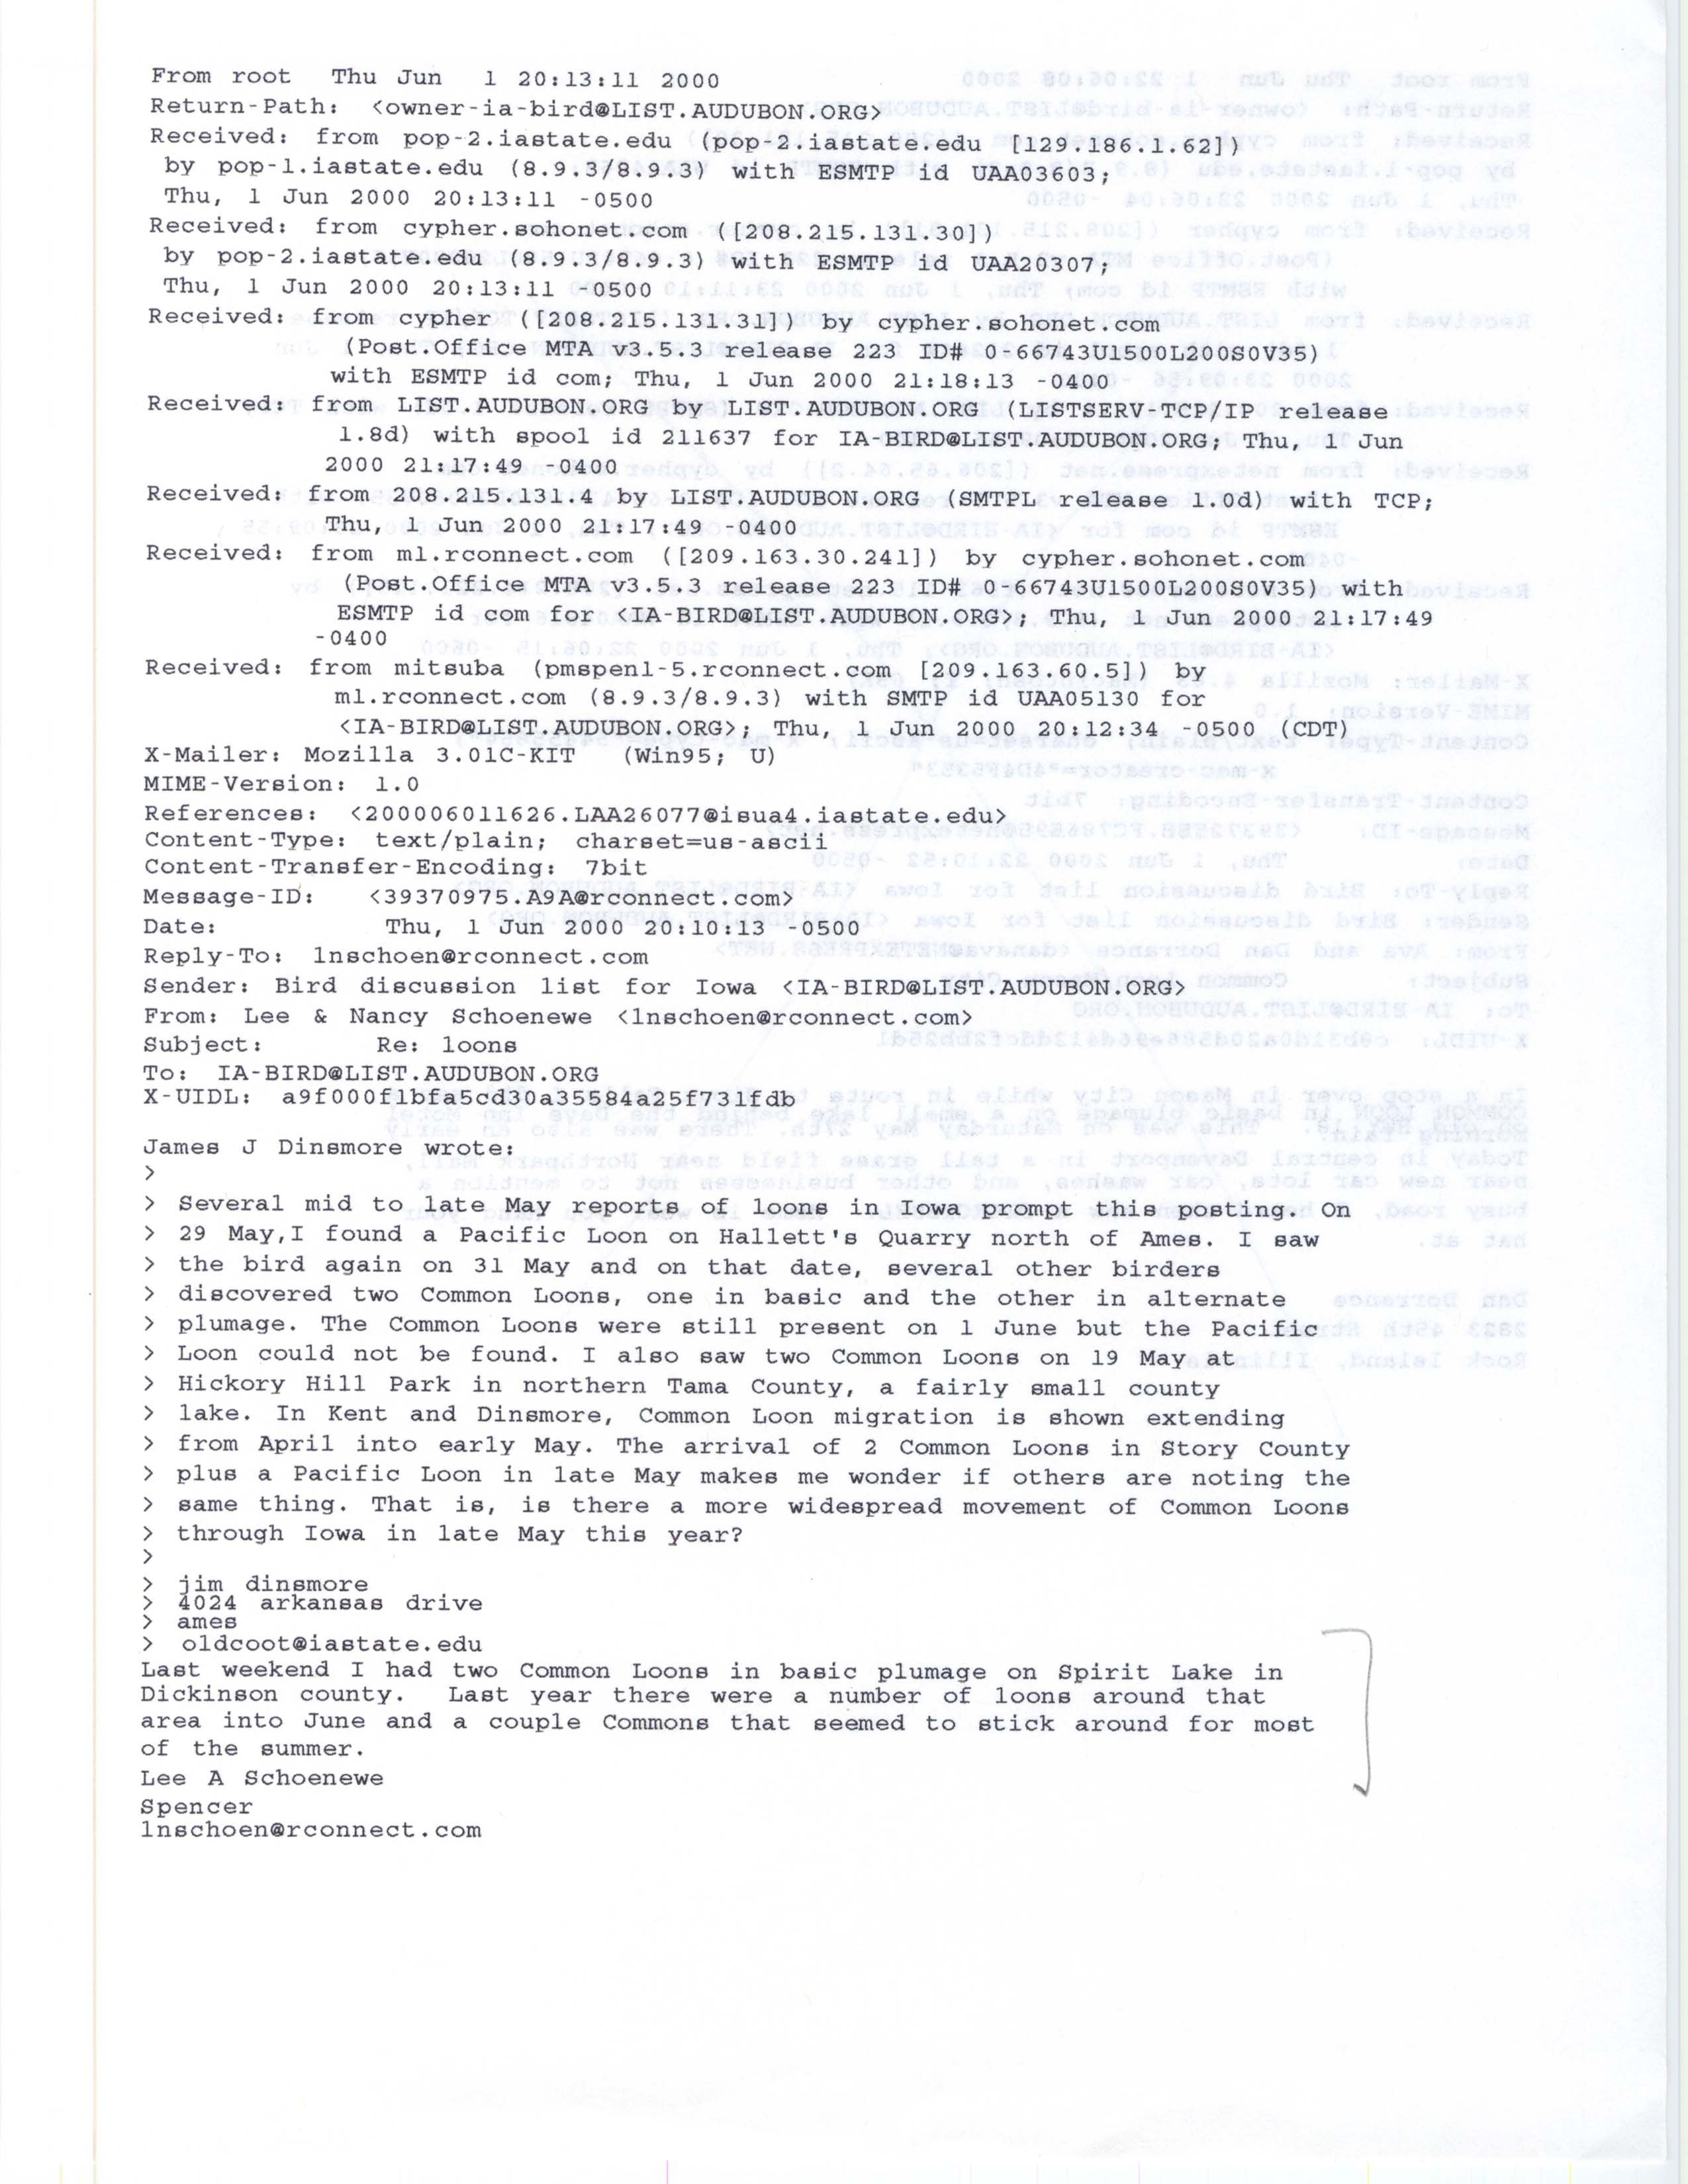 Lee Schoenewe email to the IA-BIRD mailing list regarding a Common Loon sighting, June 1, 2000